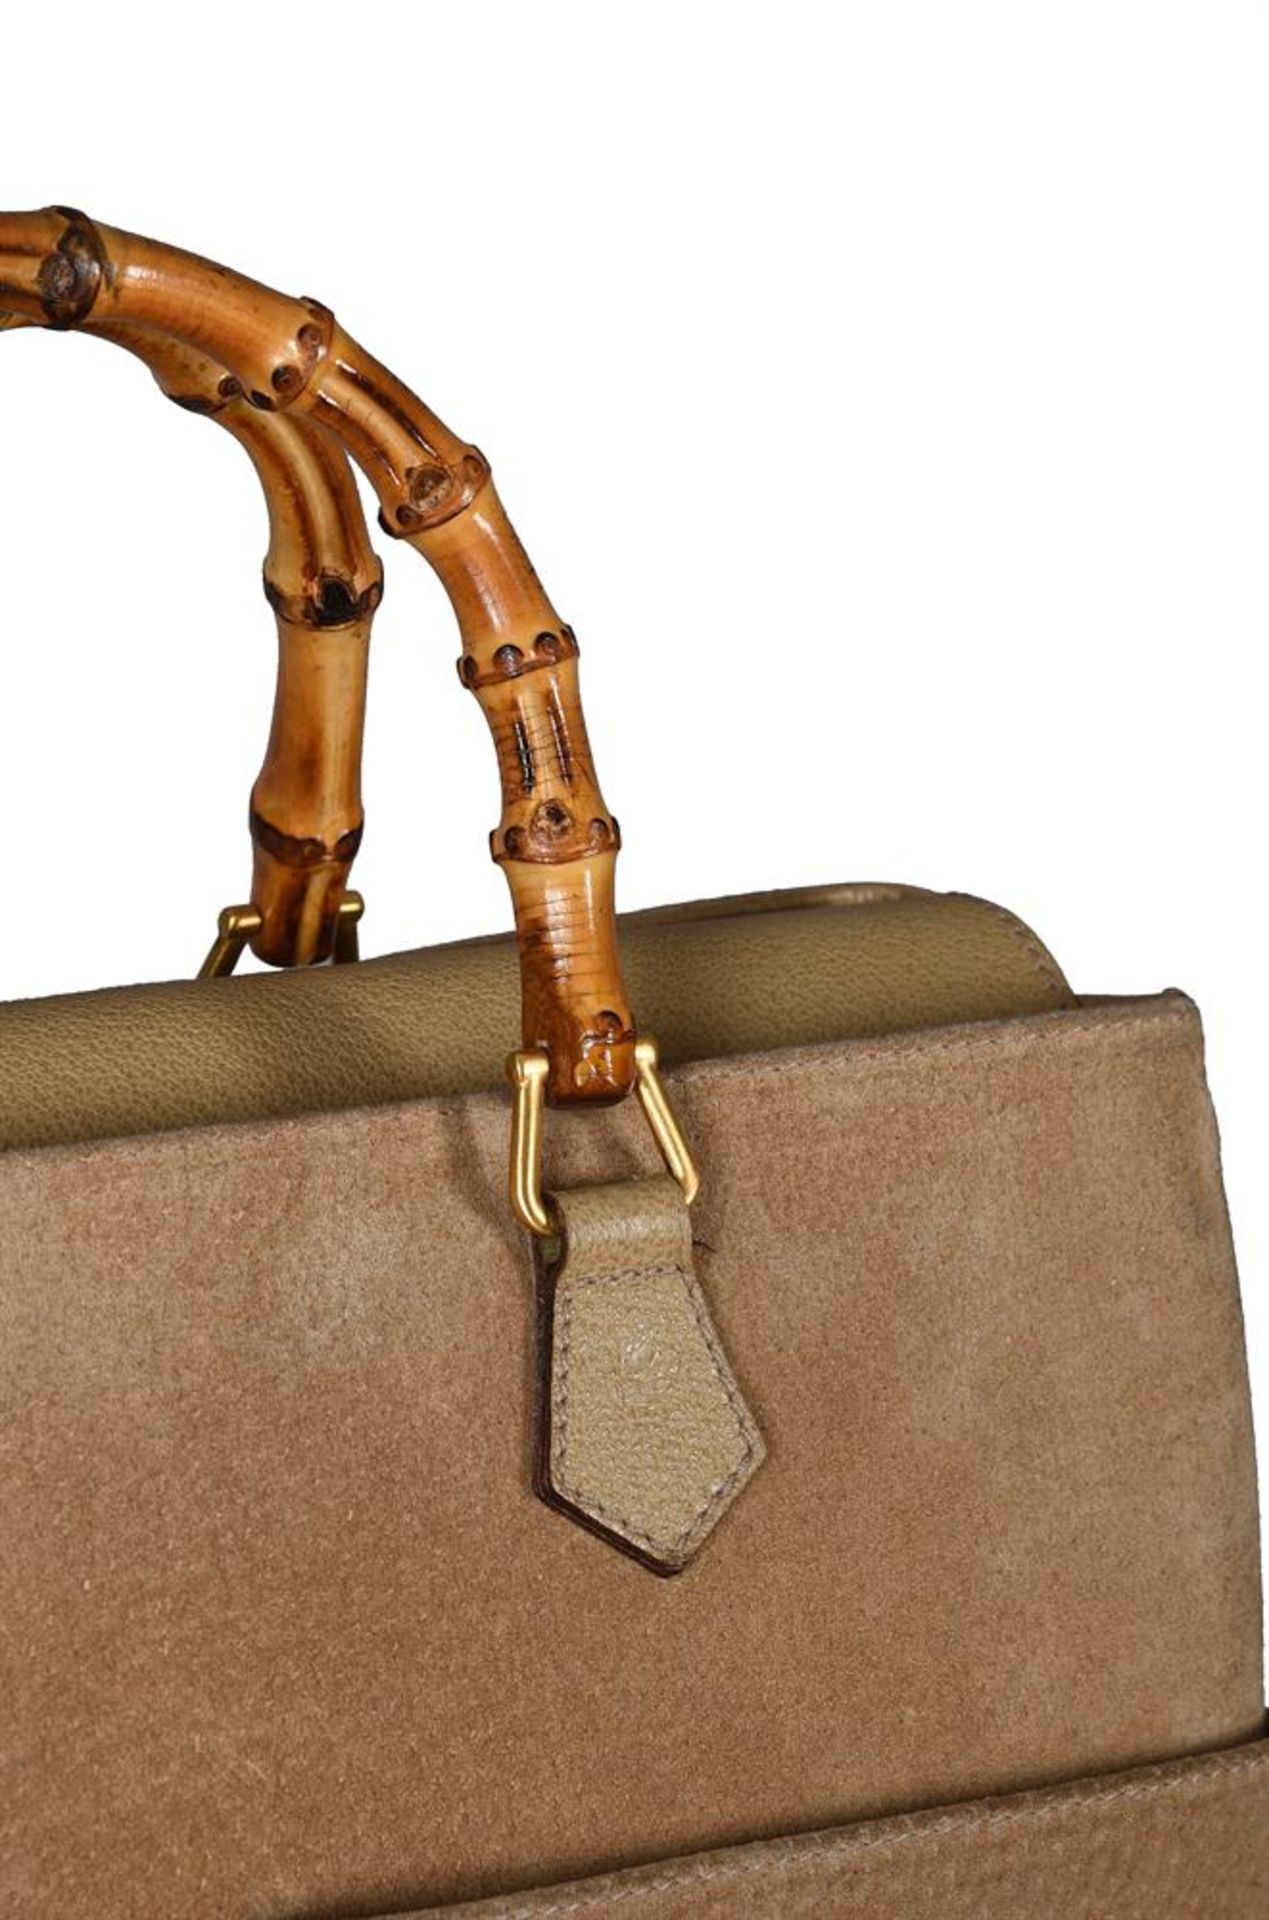 GUCCI, A VINTAGE BEIGE SUEDE, LEATHER AND BAMBOO HANDBAG - Image 3 of 4